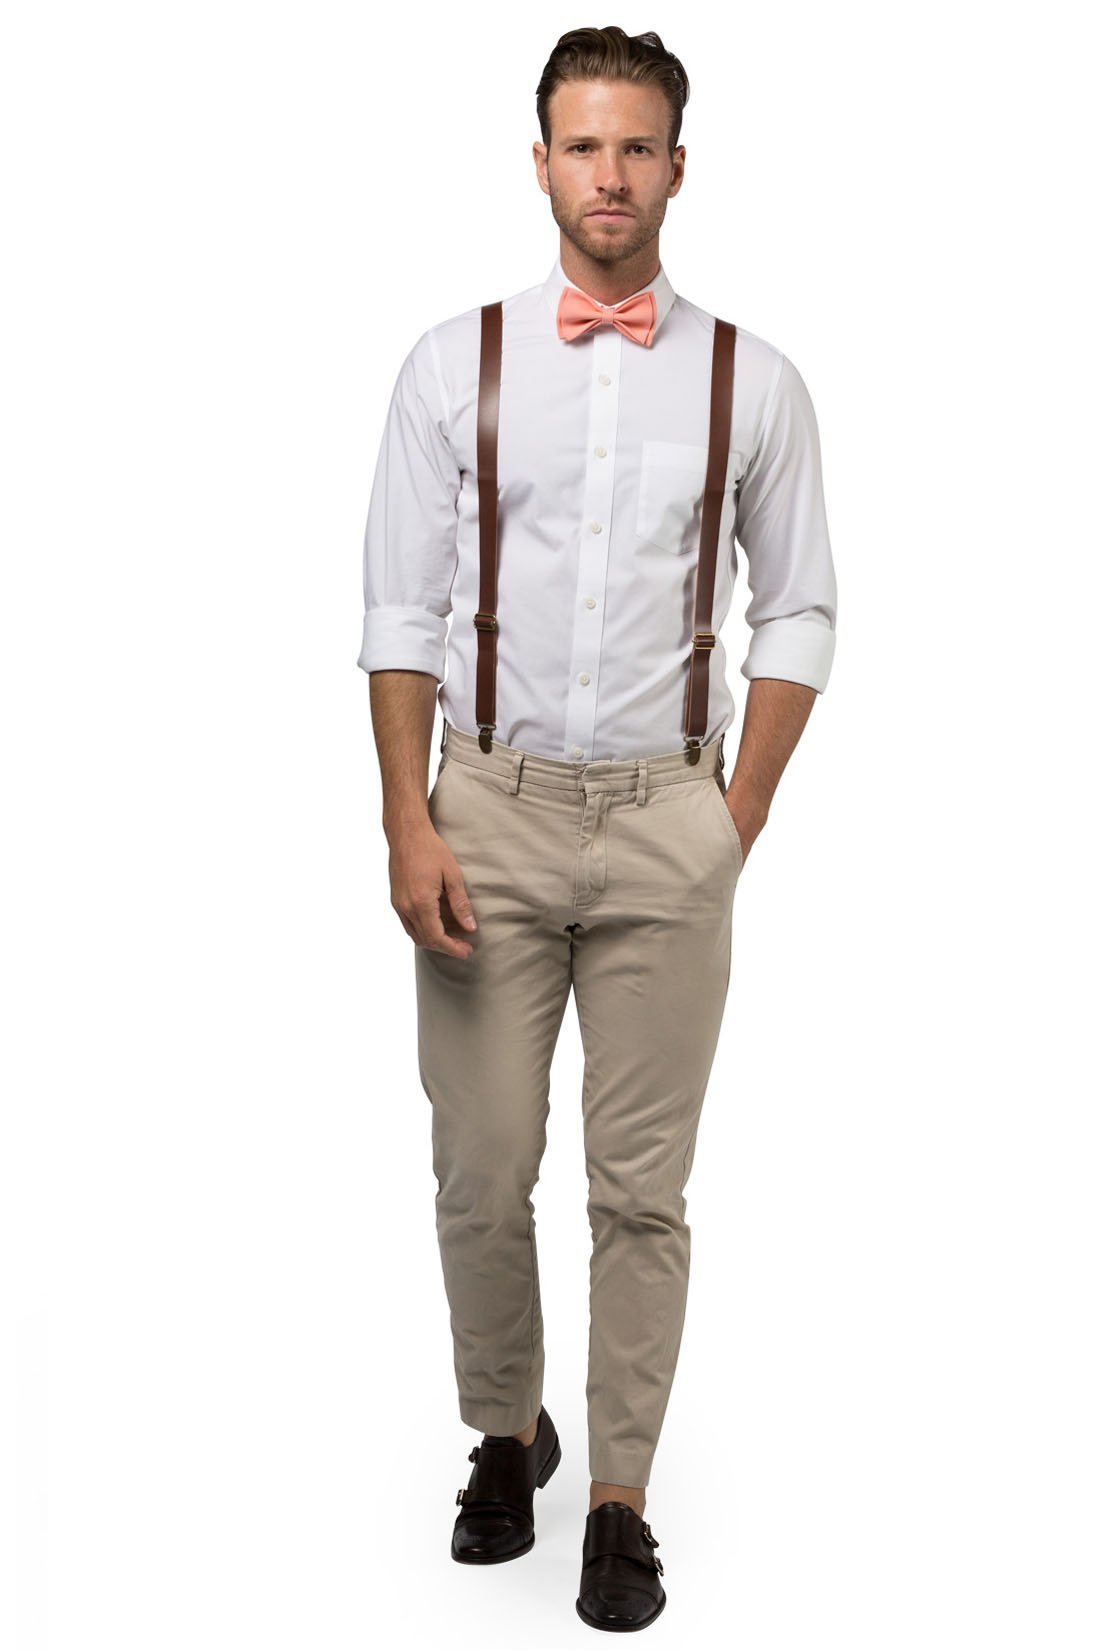 Brown Leather Suspenders & Peach Coral Bow Tie